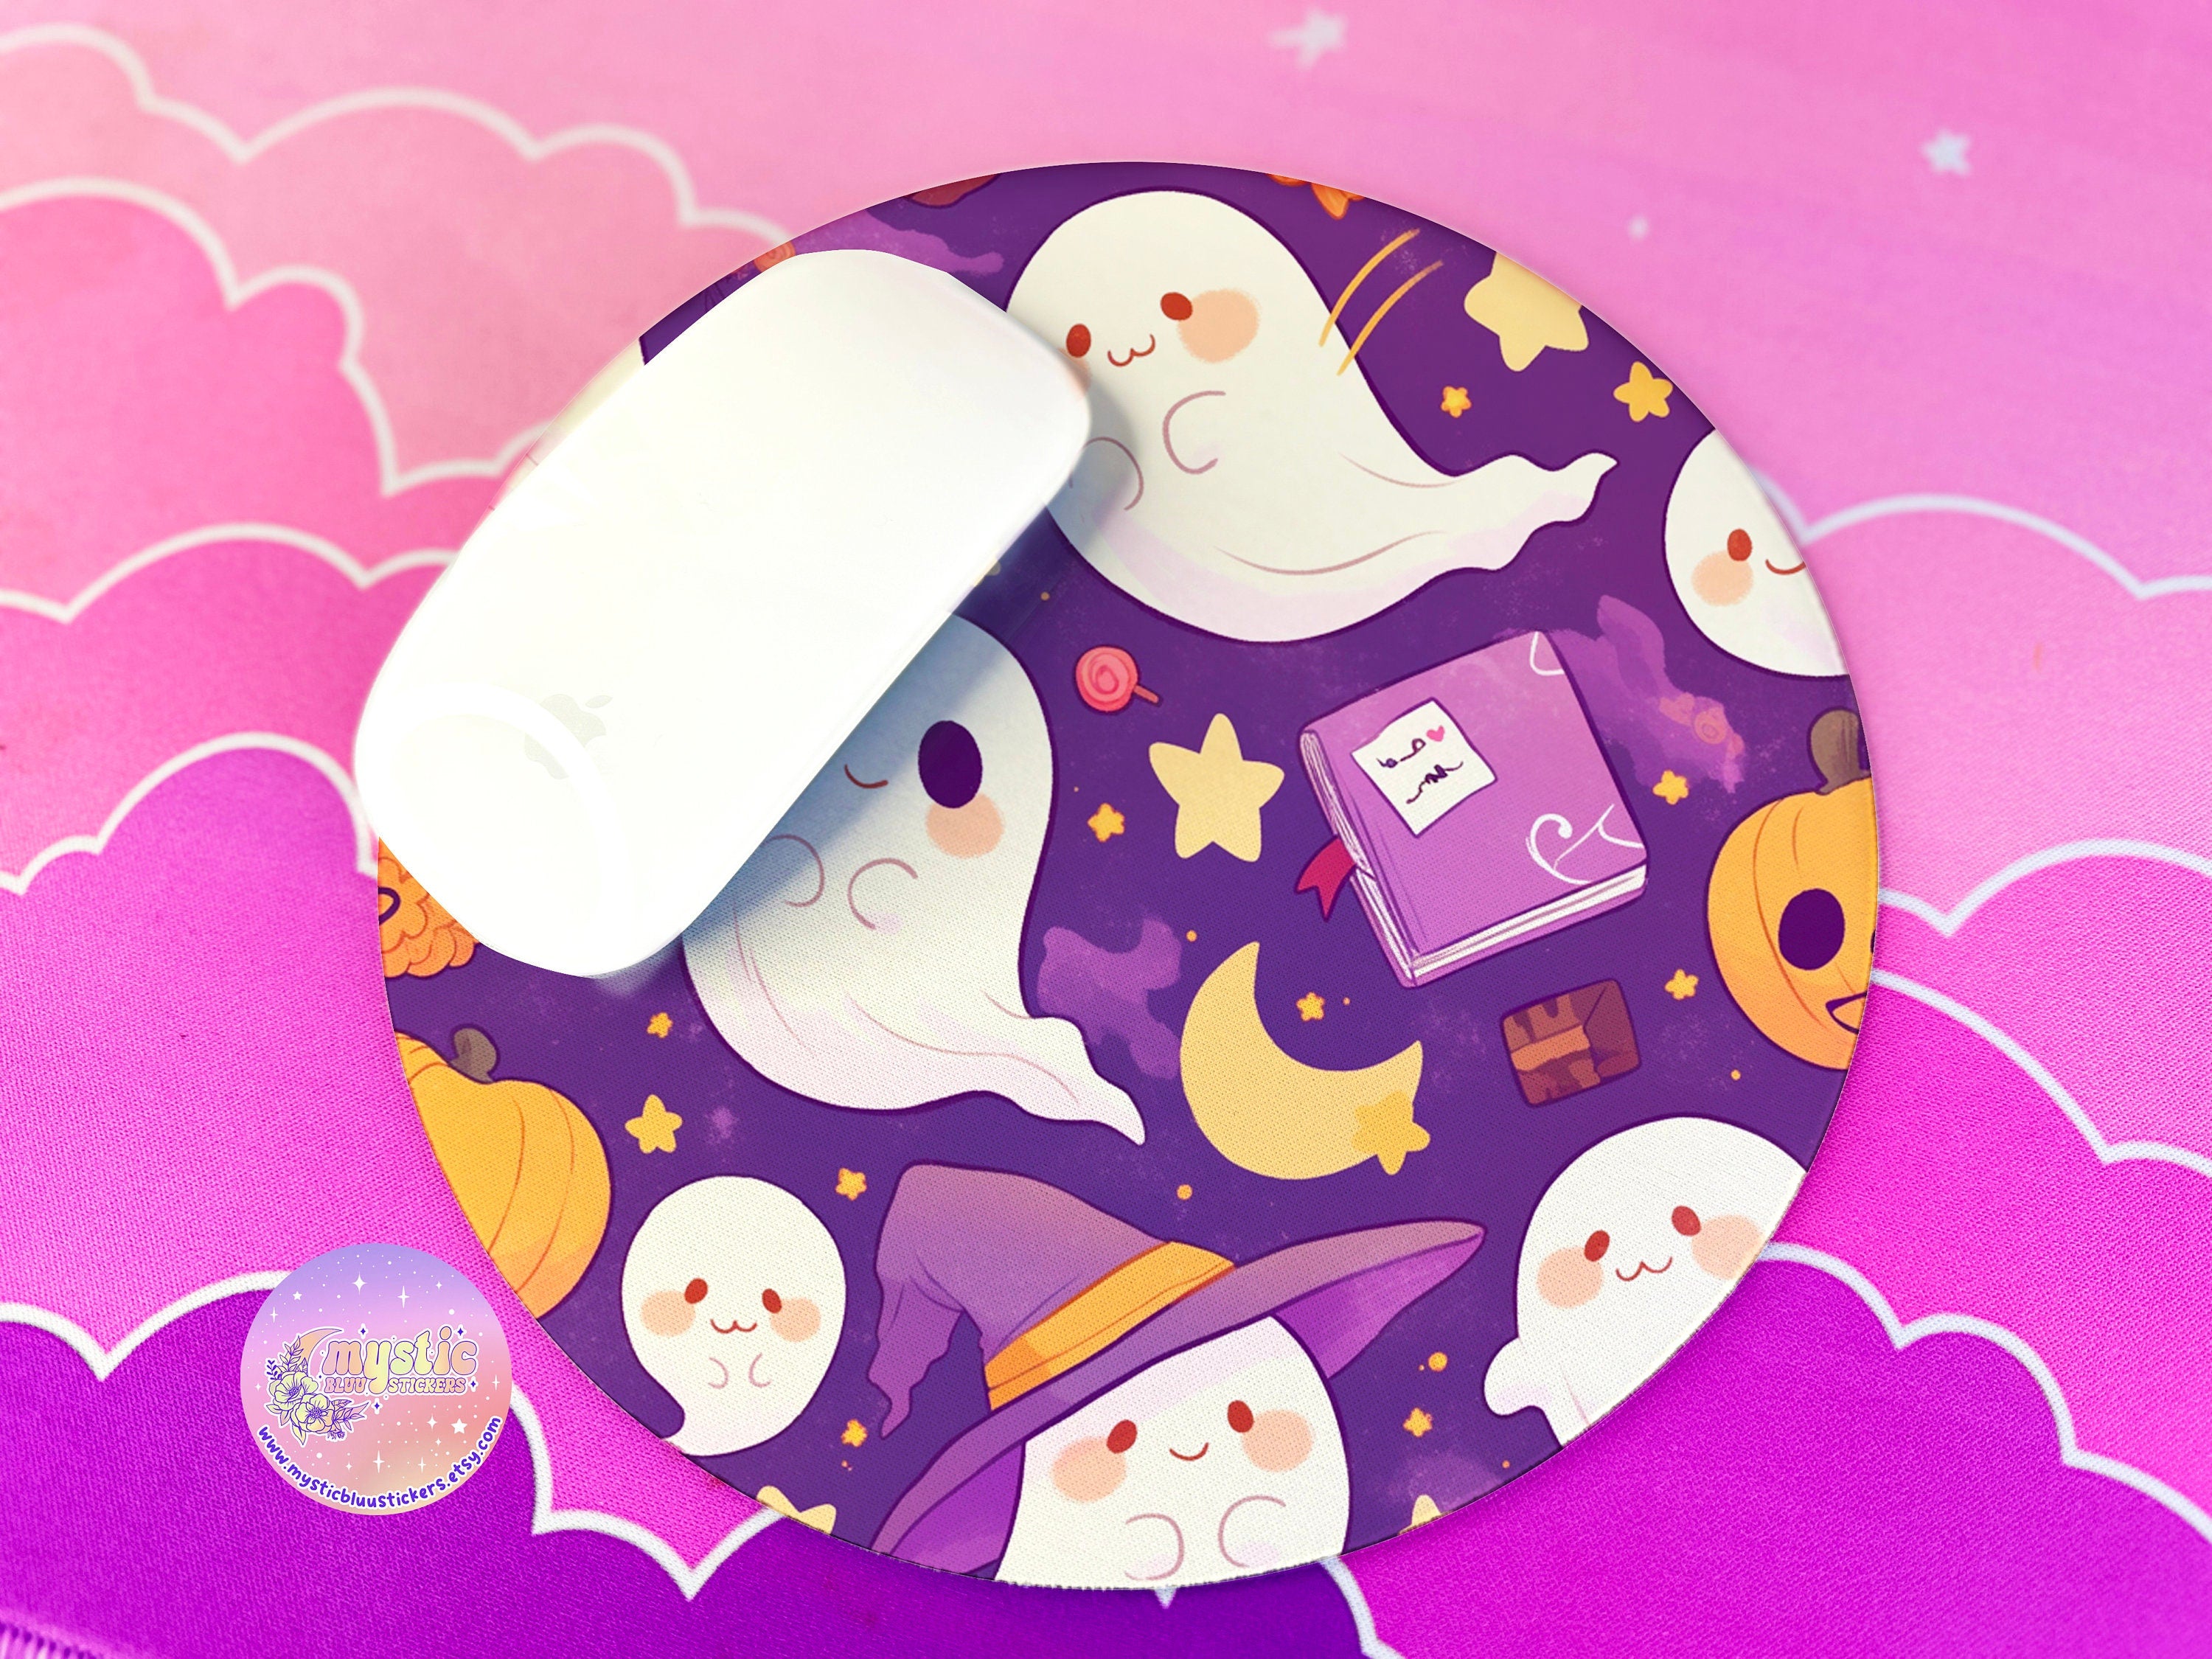 esthetic Ghost Mousepad with Pumpkins and Autumn Leaves - Kawaii Decor